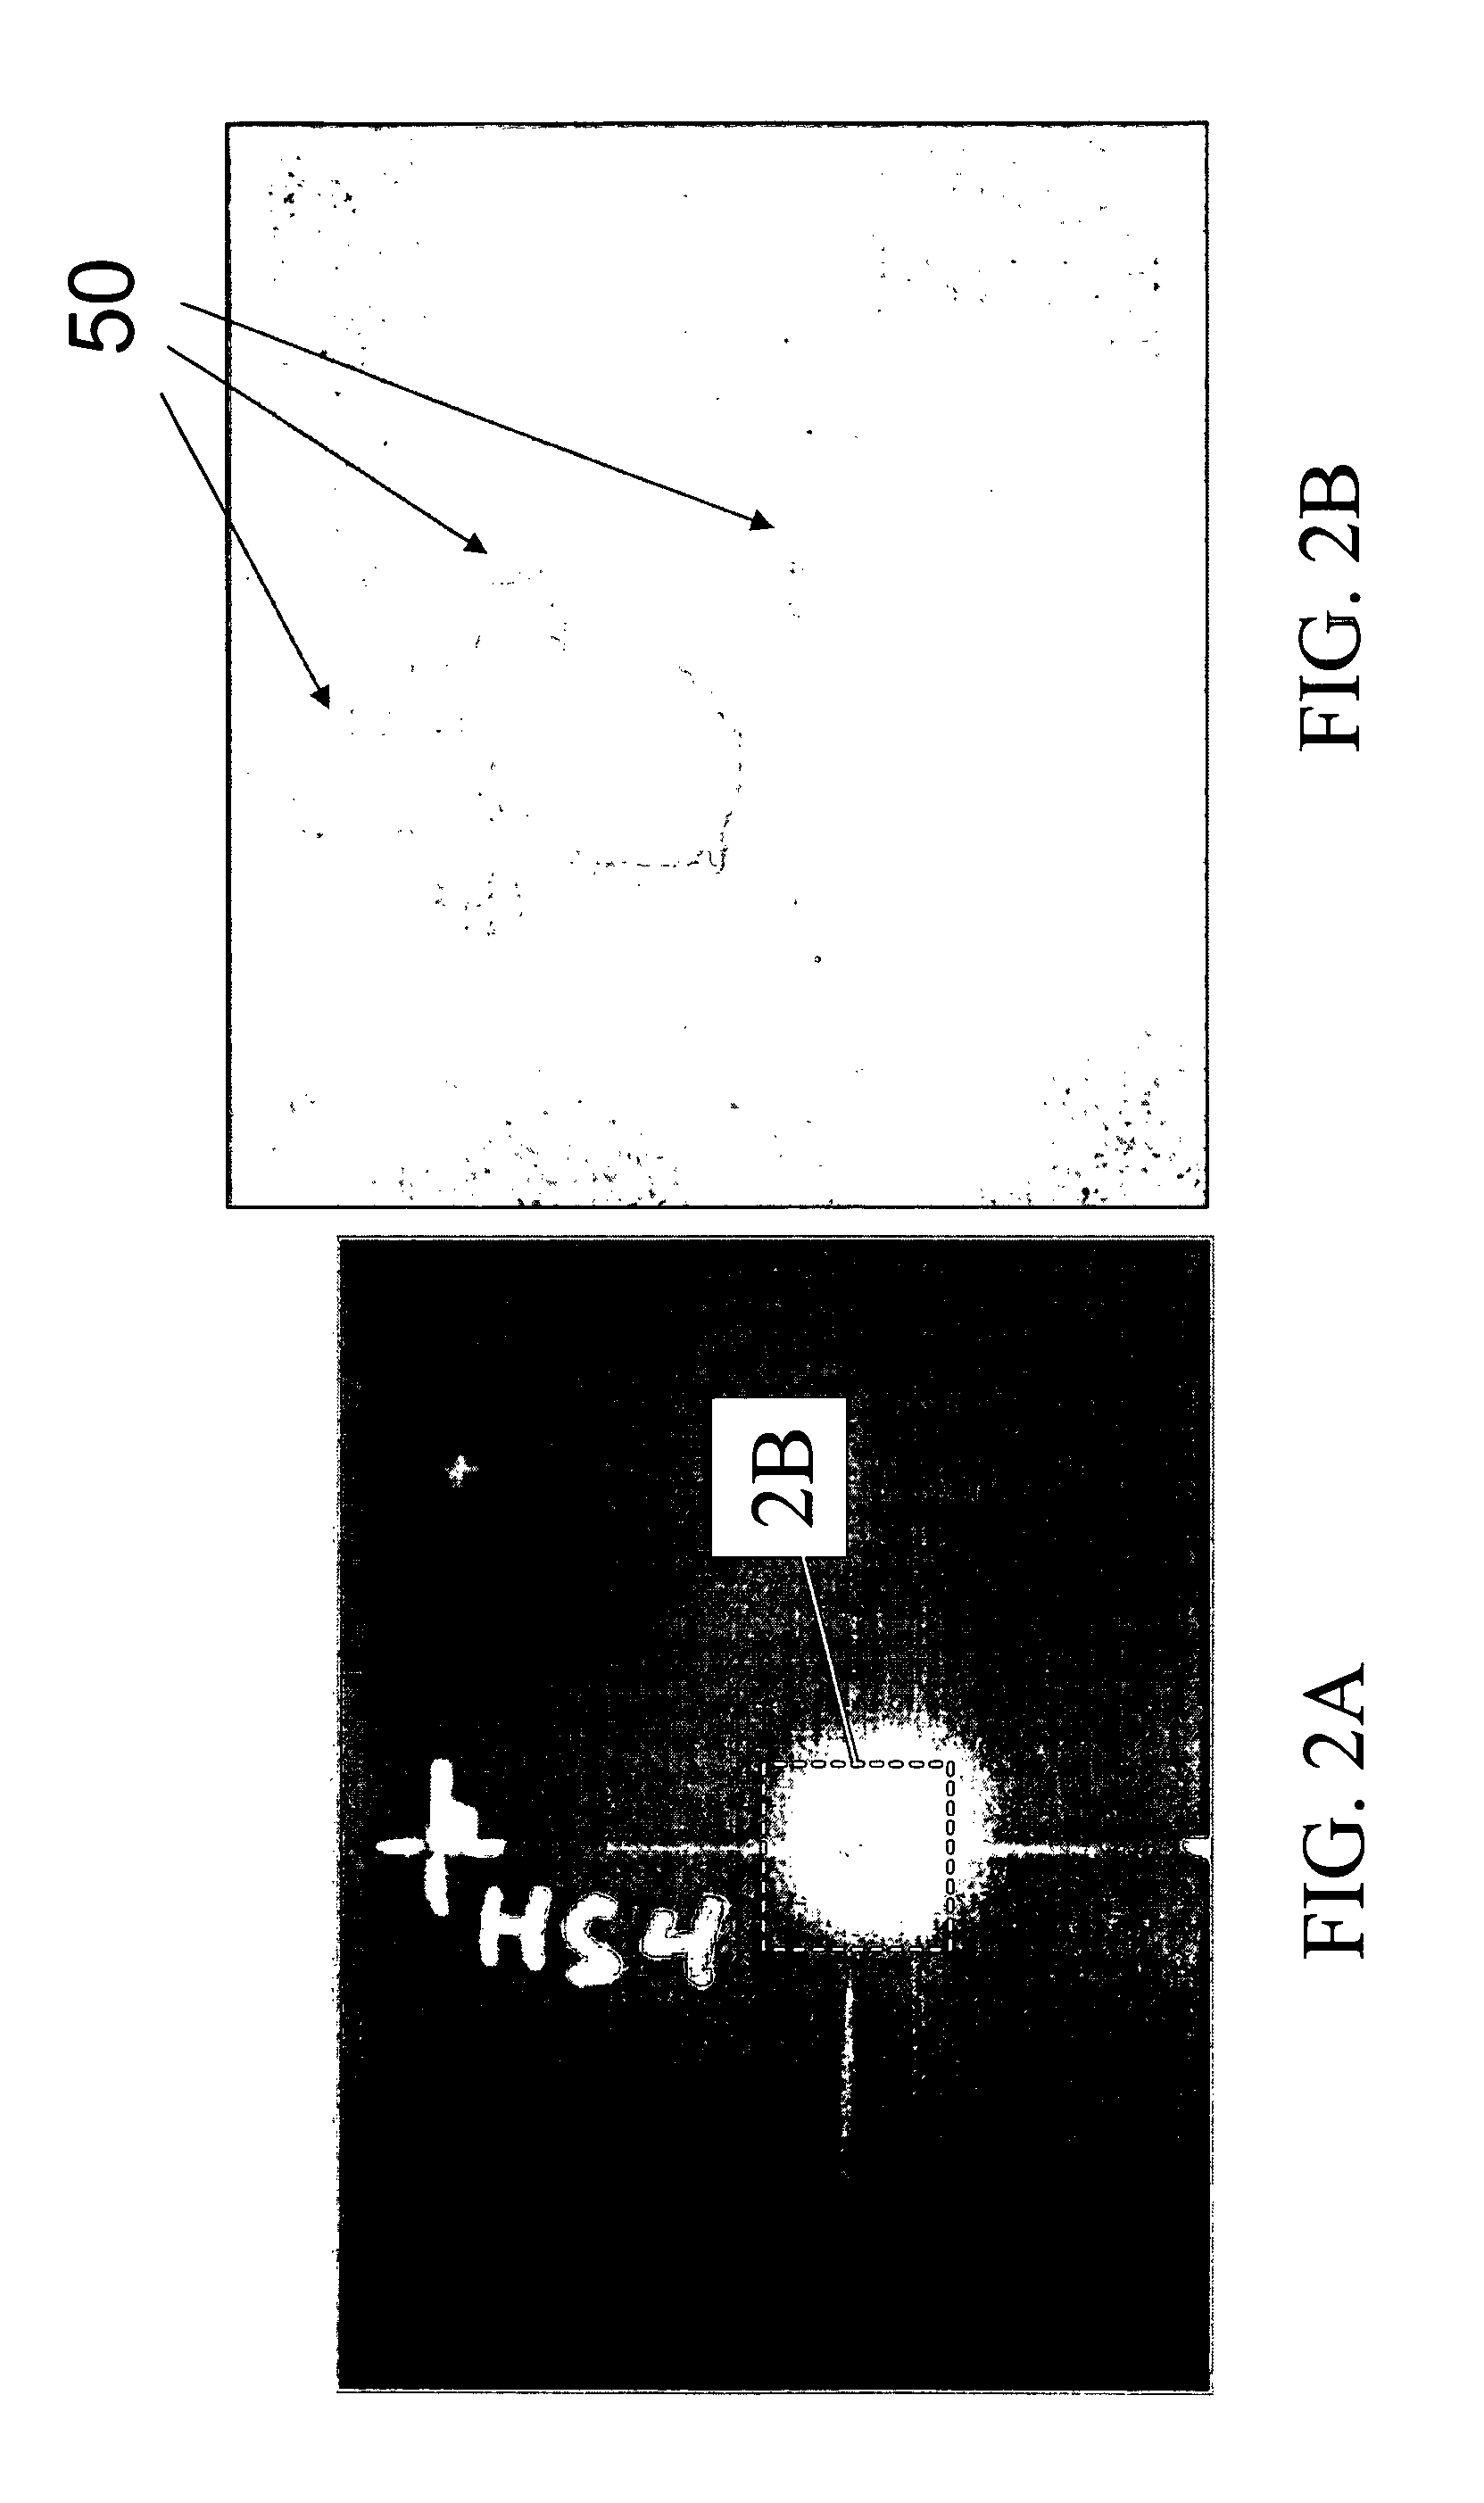 Non-contact thermo-elastic property measurement and imaging system for quantitative nondestructive evaluation of materials